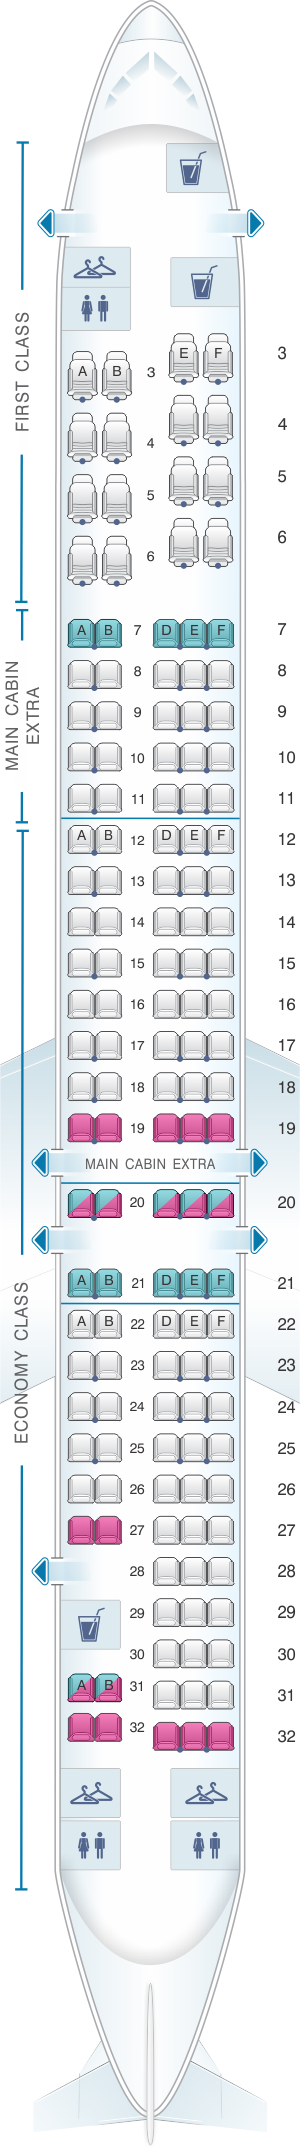 Delta Airlines Md 88 Seating Chart